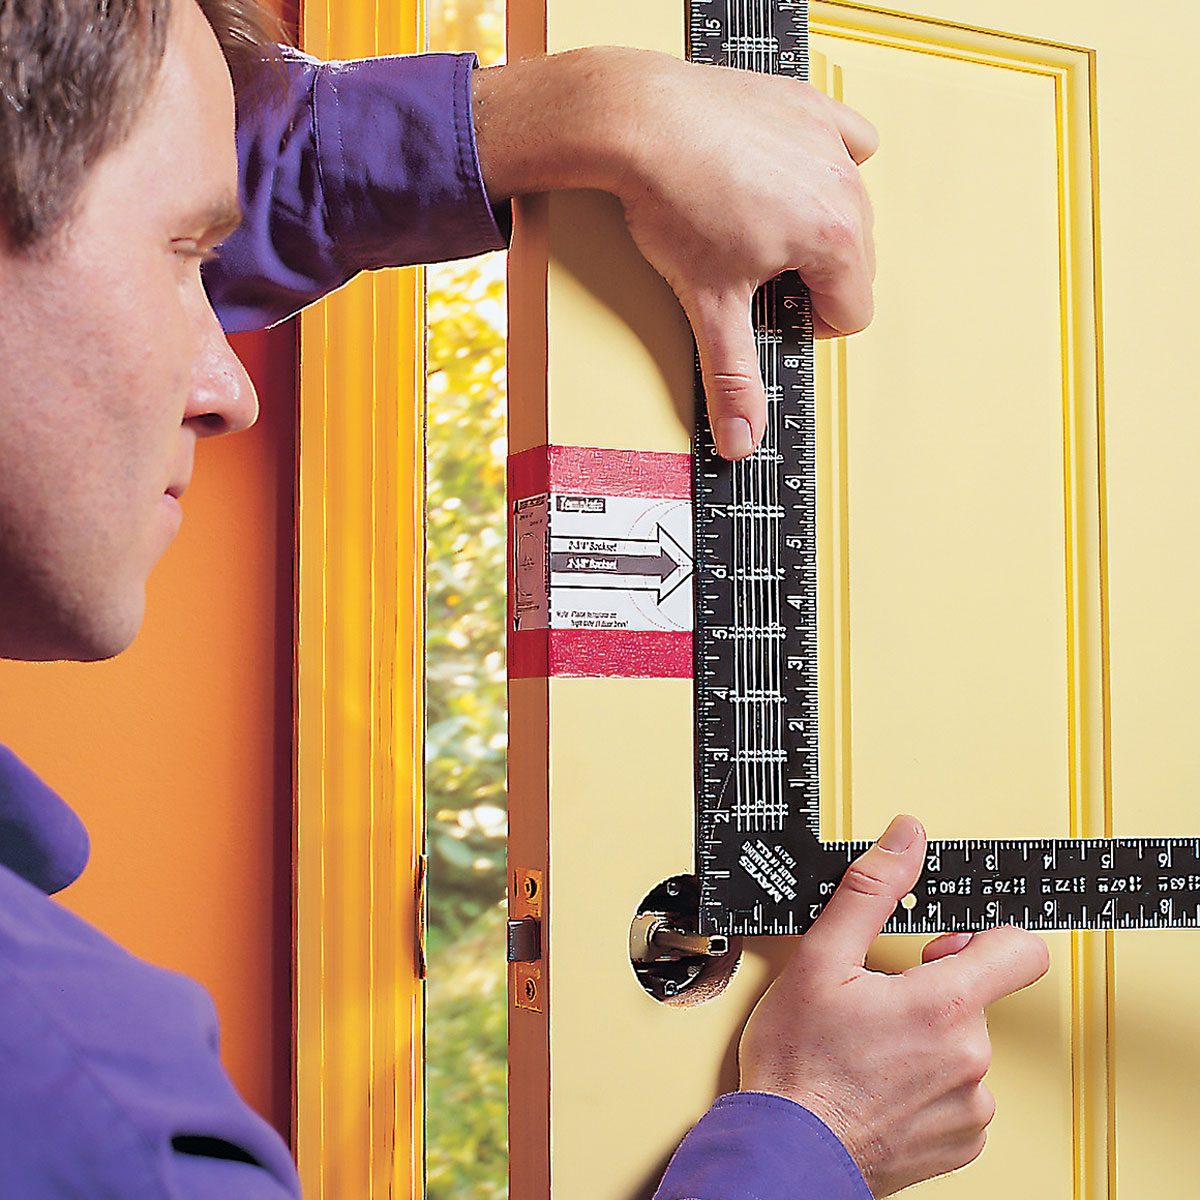 Marking the Door with Scale for Drilling, How To Install A Deadbolt Lock